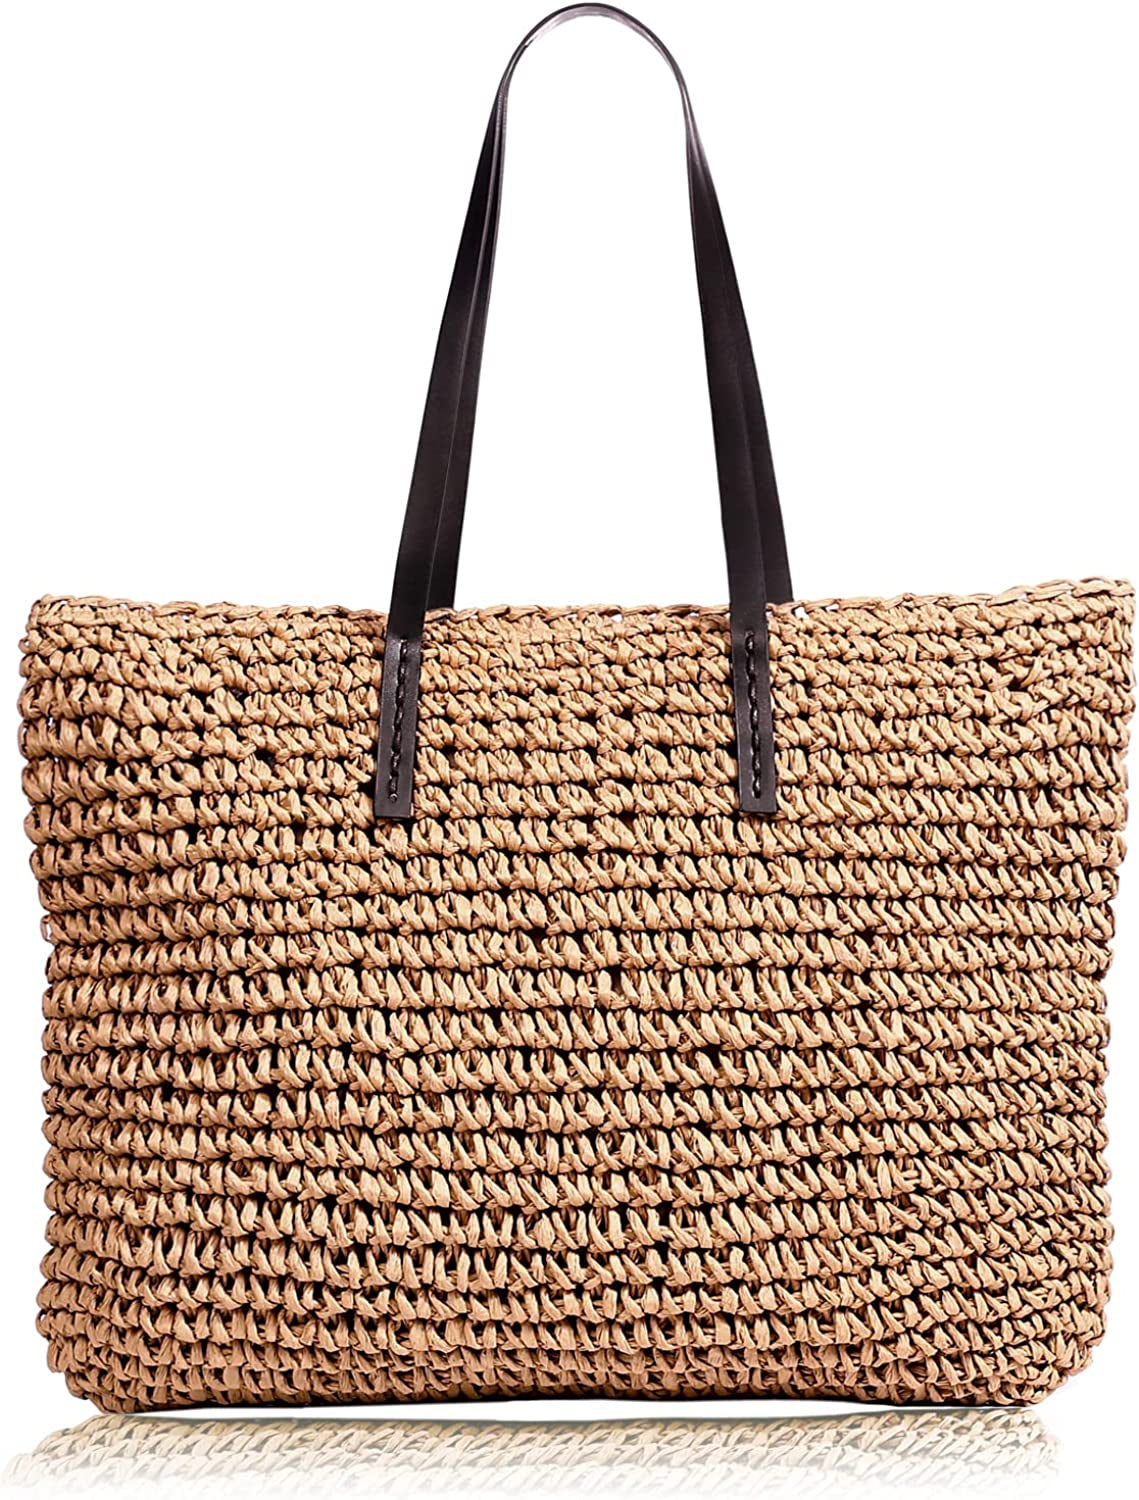  Handmade Woven Shoulder Tote Bags Purse for Women